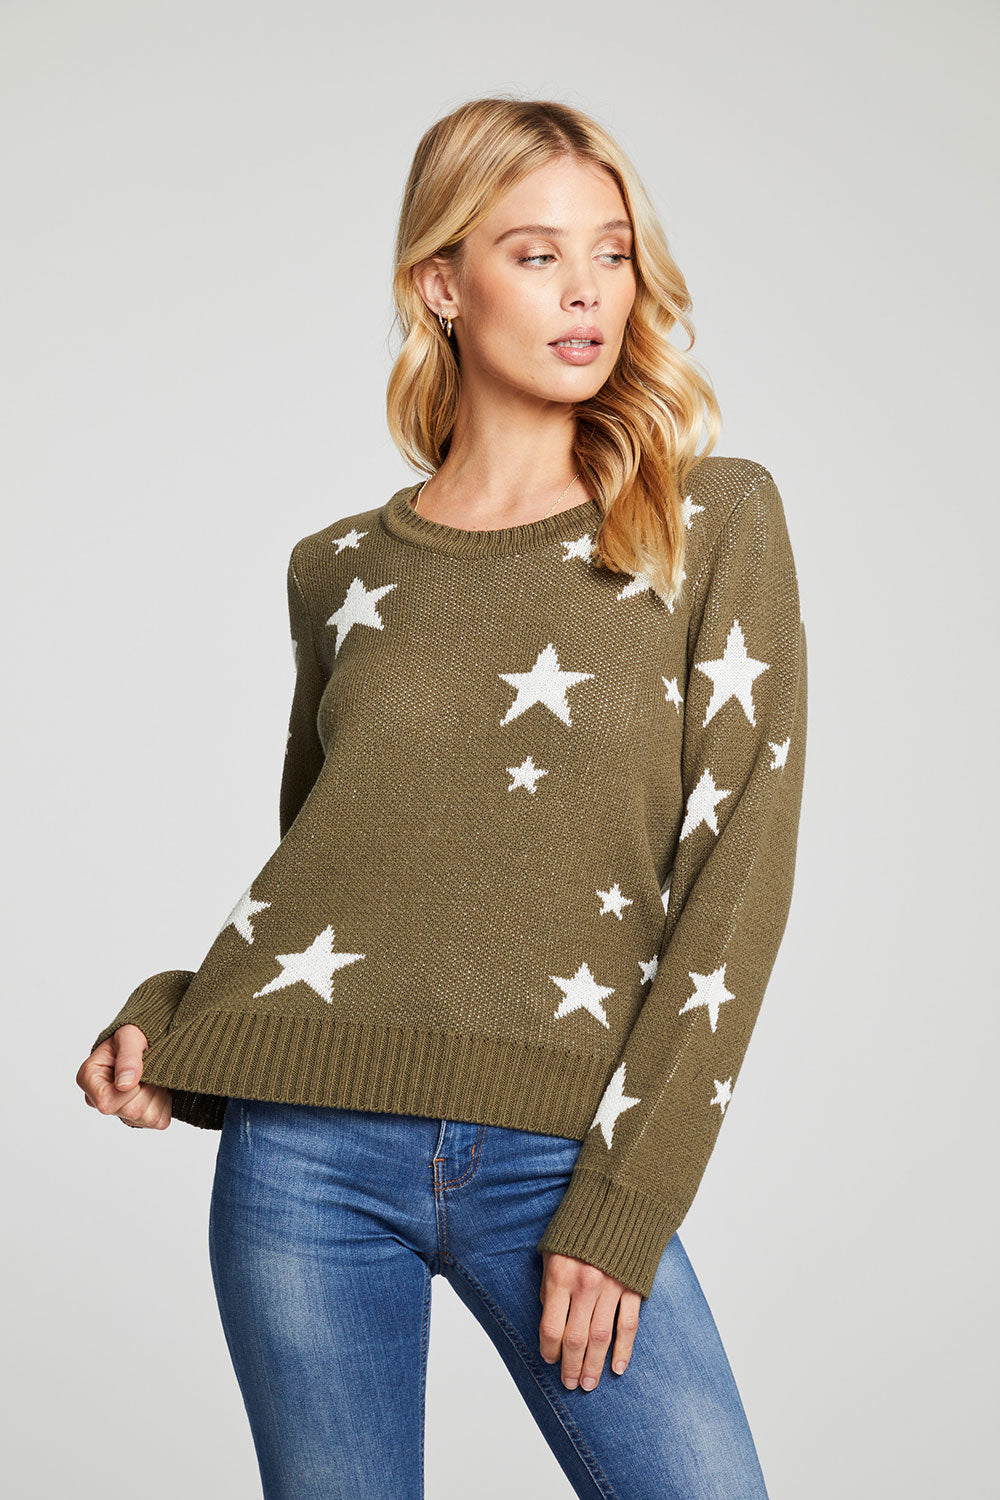 Military Stars Sweater WOMENS chaserbrand